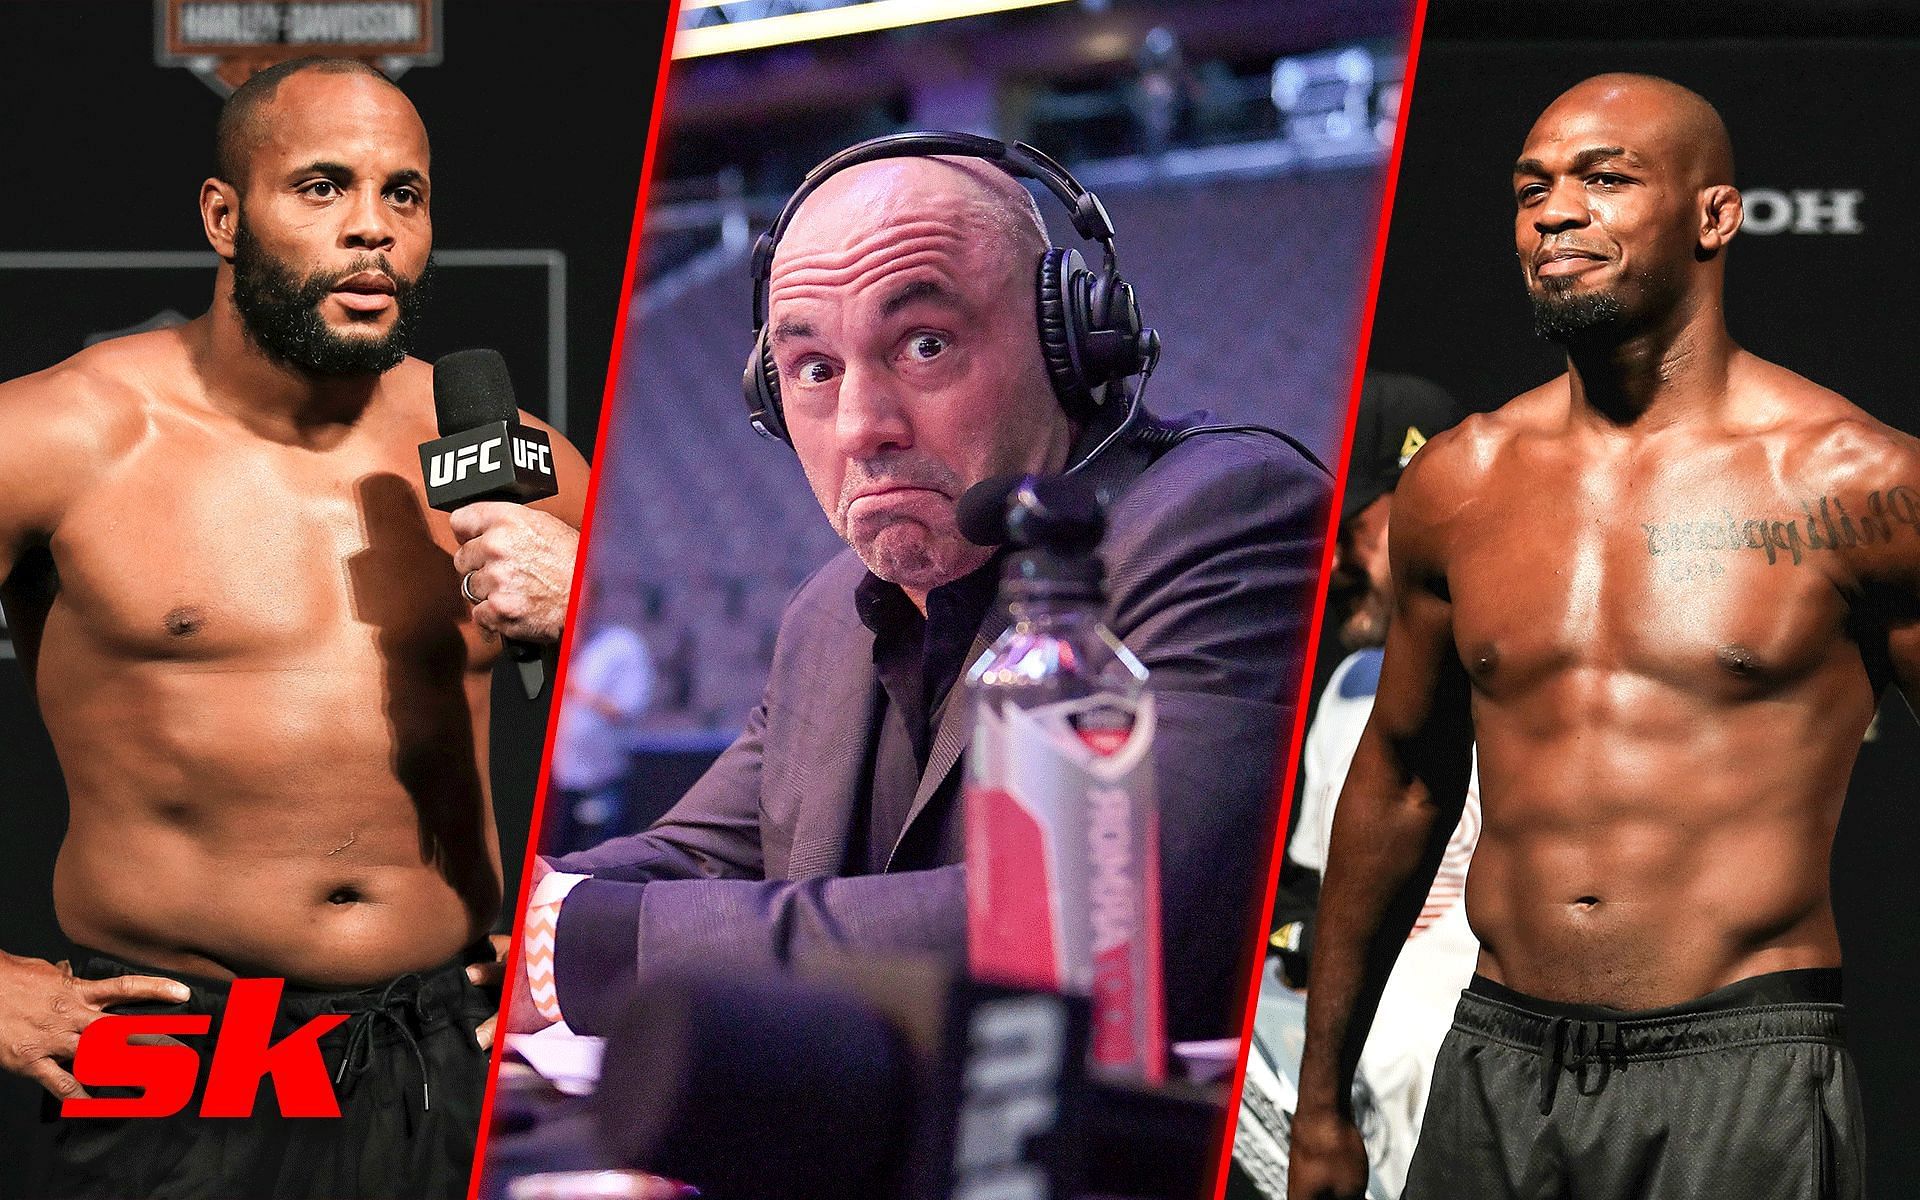 Watch: When Joe Rogan was left shocked on live TV as Daniel Cormier vowed to make Jon Jones quit ahead of their rematch